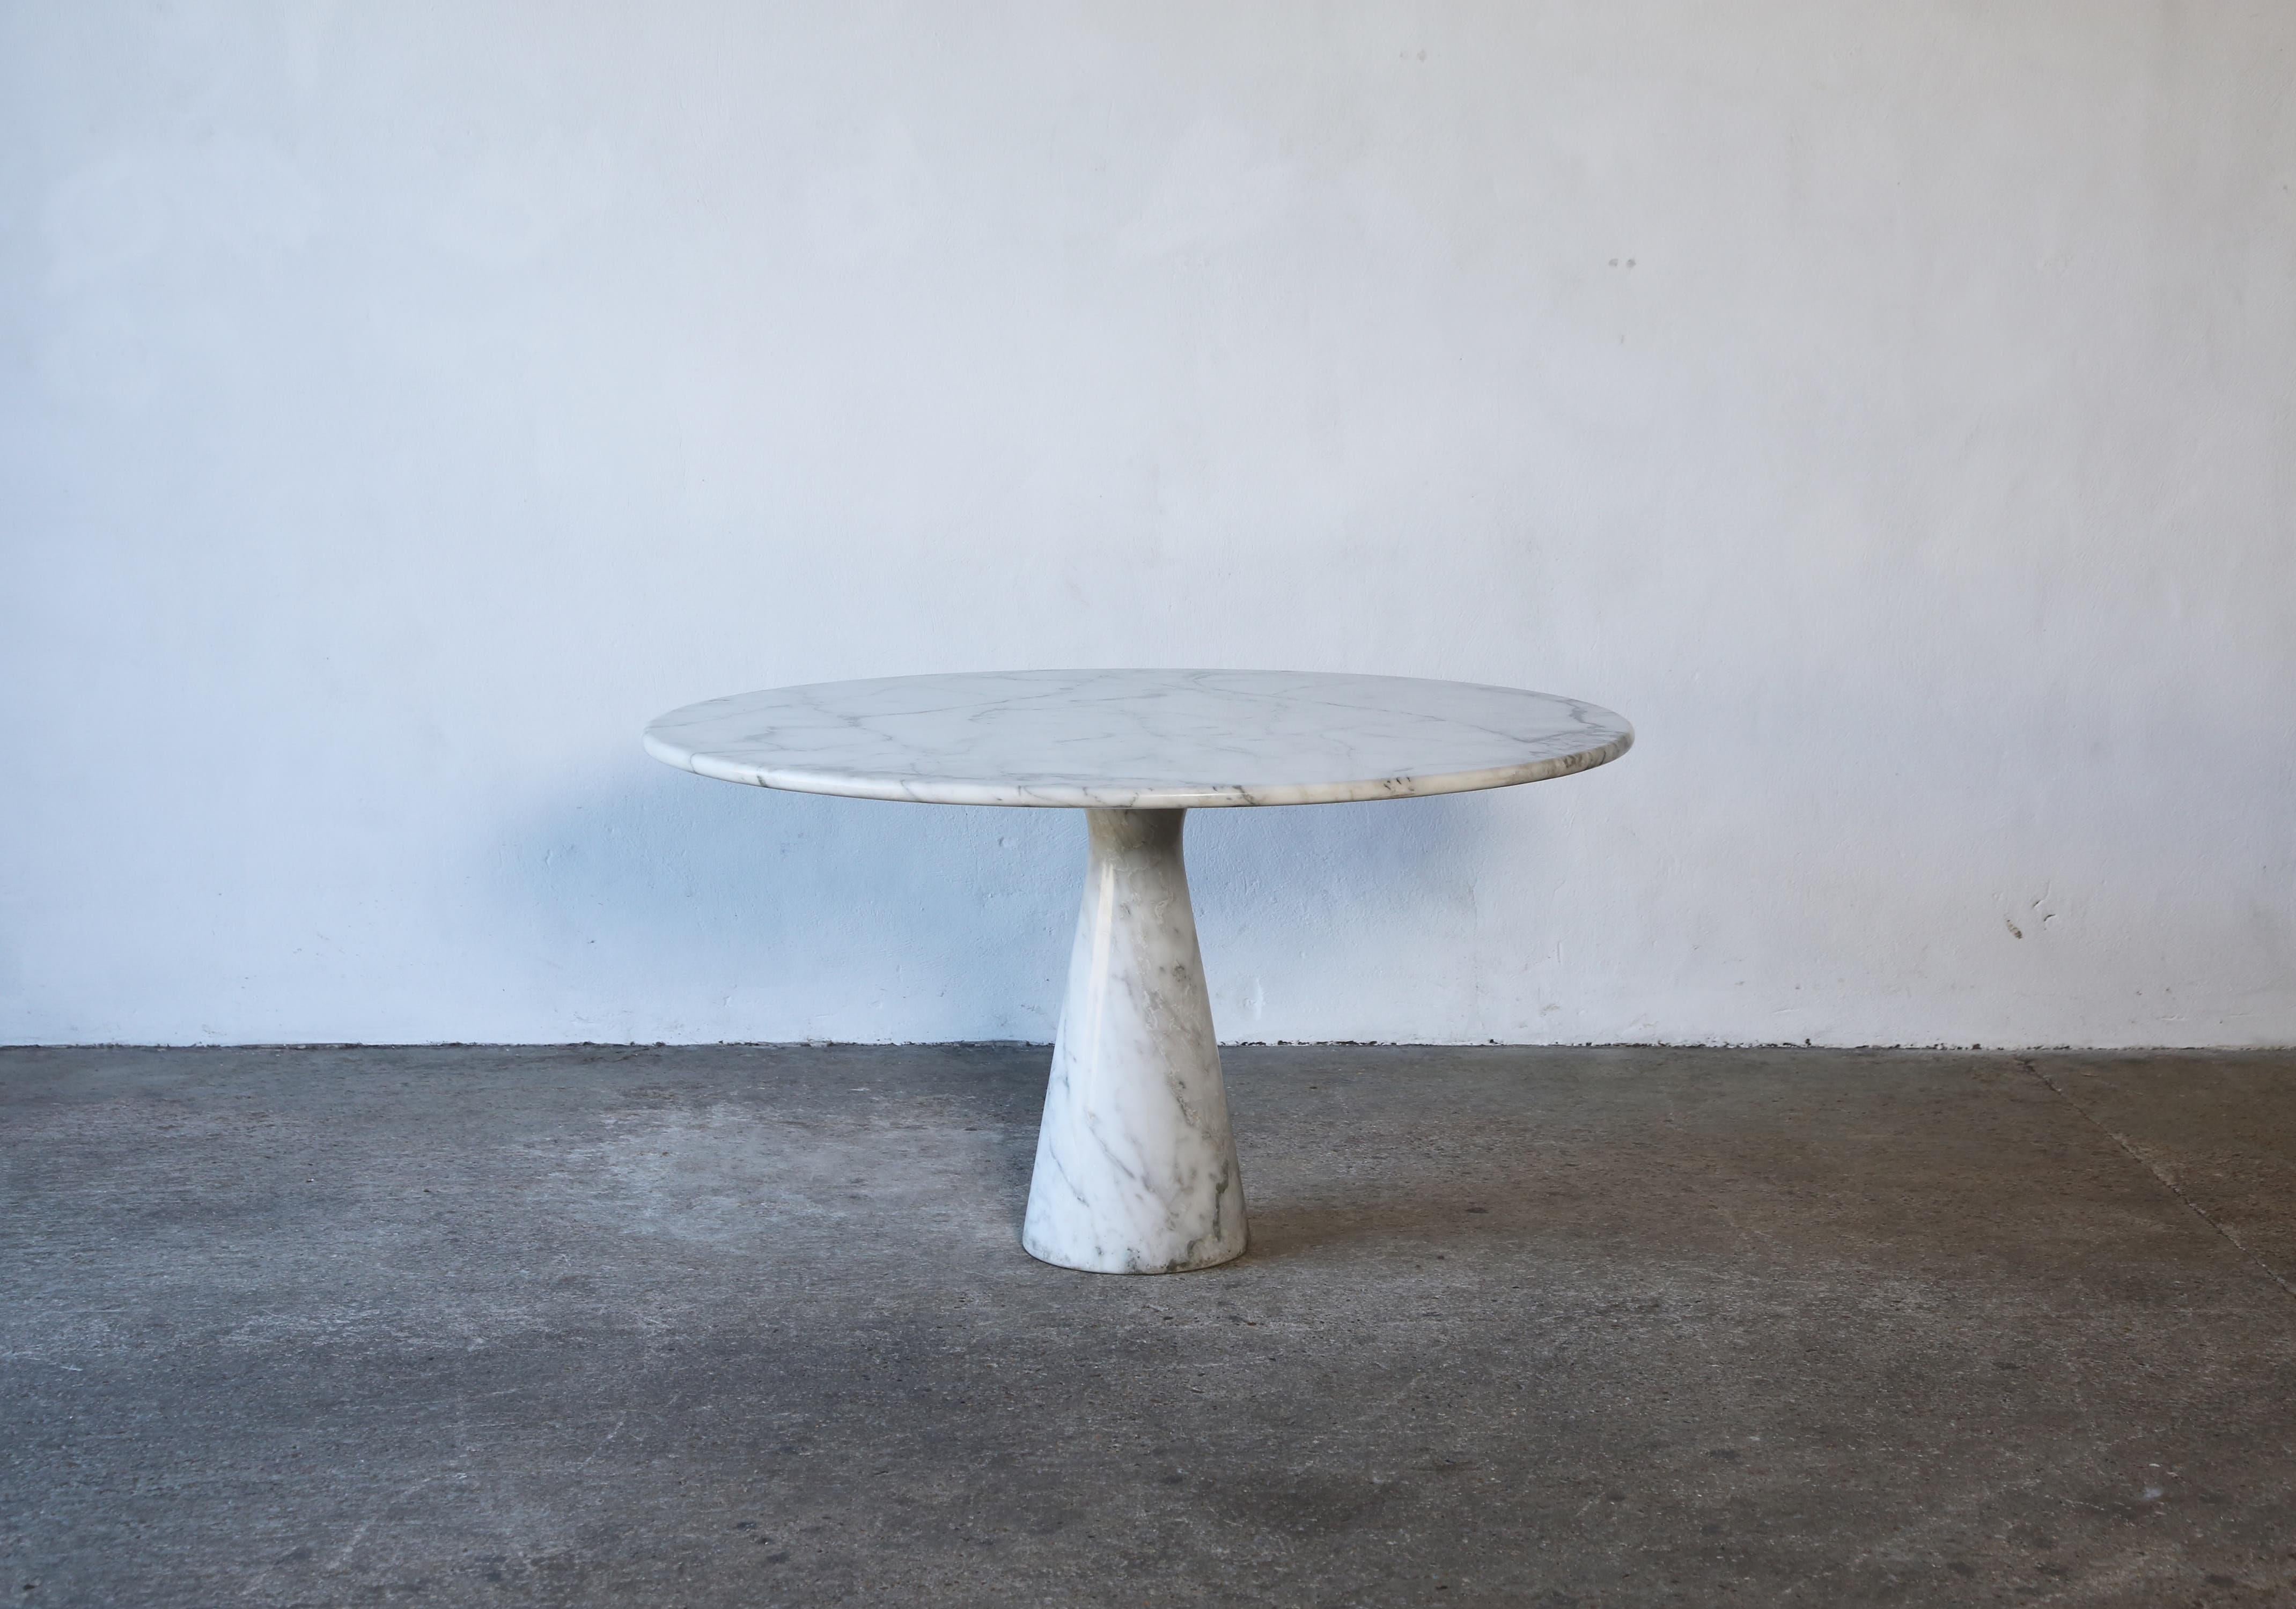 A beautiful, original Angelo Mangiarotti round marble M1 dining table for Skipper, Italy, 1970s. Stunning solid marble with wonderful character in tones of white, blue/grey with occasional hints of bronze. Very good original  condition. Ships